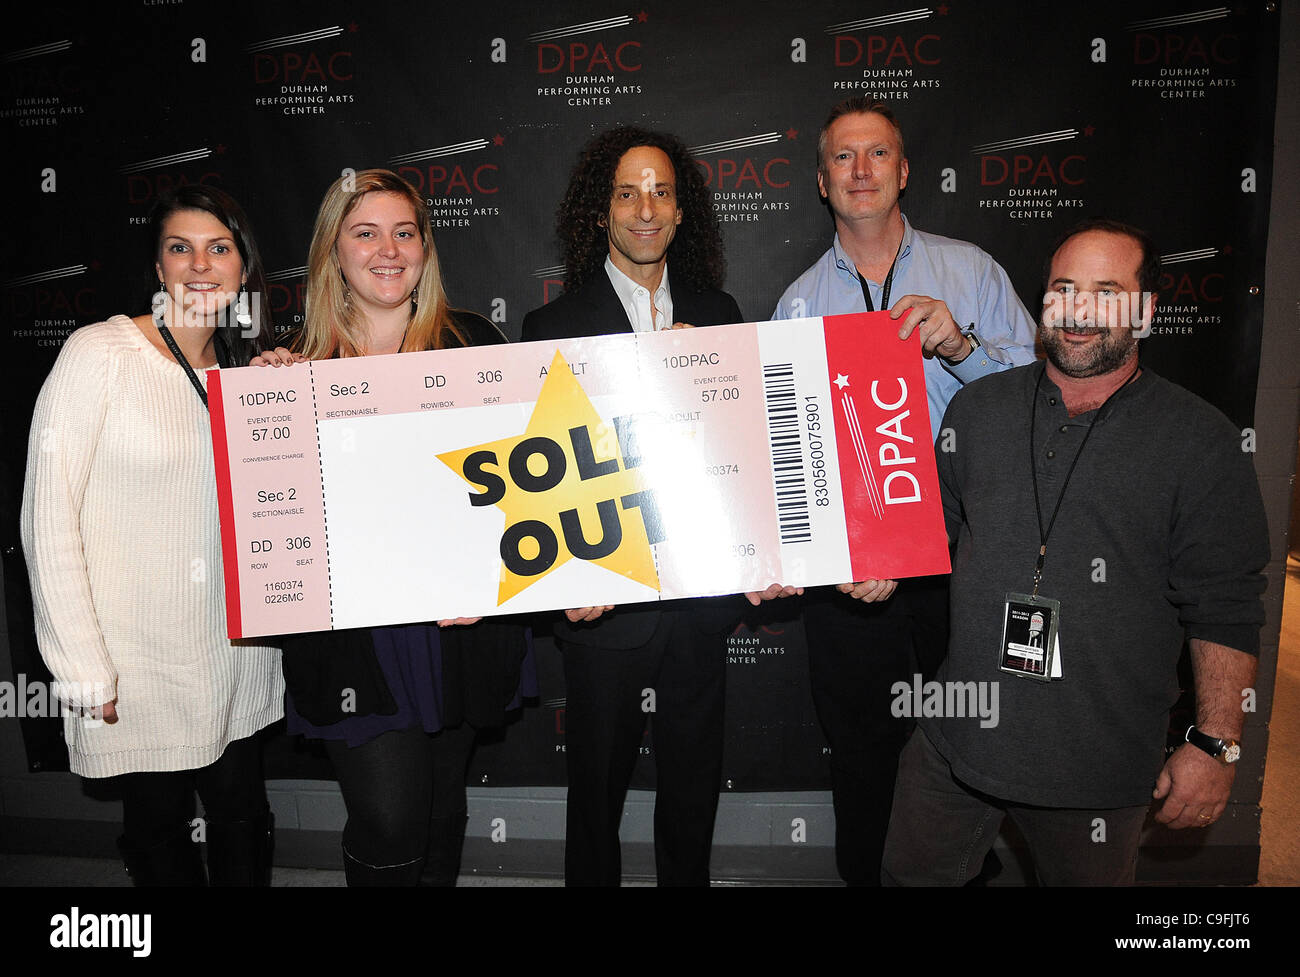 Dec. 15, 2011 - Durham, North Carolina; USA - Musician KENNY G takes a moment with (L-R) DPAC'S RACHEL GRAGG, JENNIE LANNING, KENNY G, General Manager BOB KLAUS and AEG'S SCOTT GARTNER before he performs live as his 2011 tour makes a stop to a sold out audience at the Durham Performing Arts Center.  Stock Photo